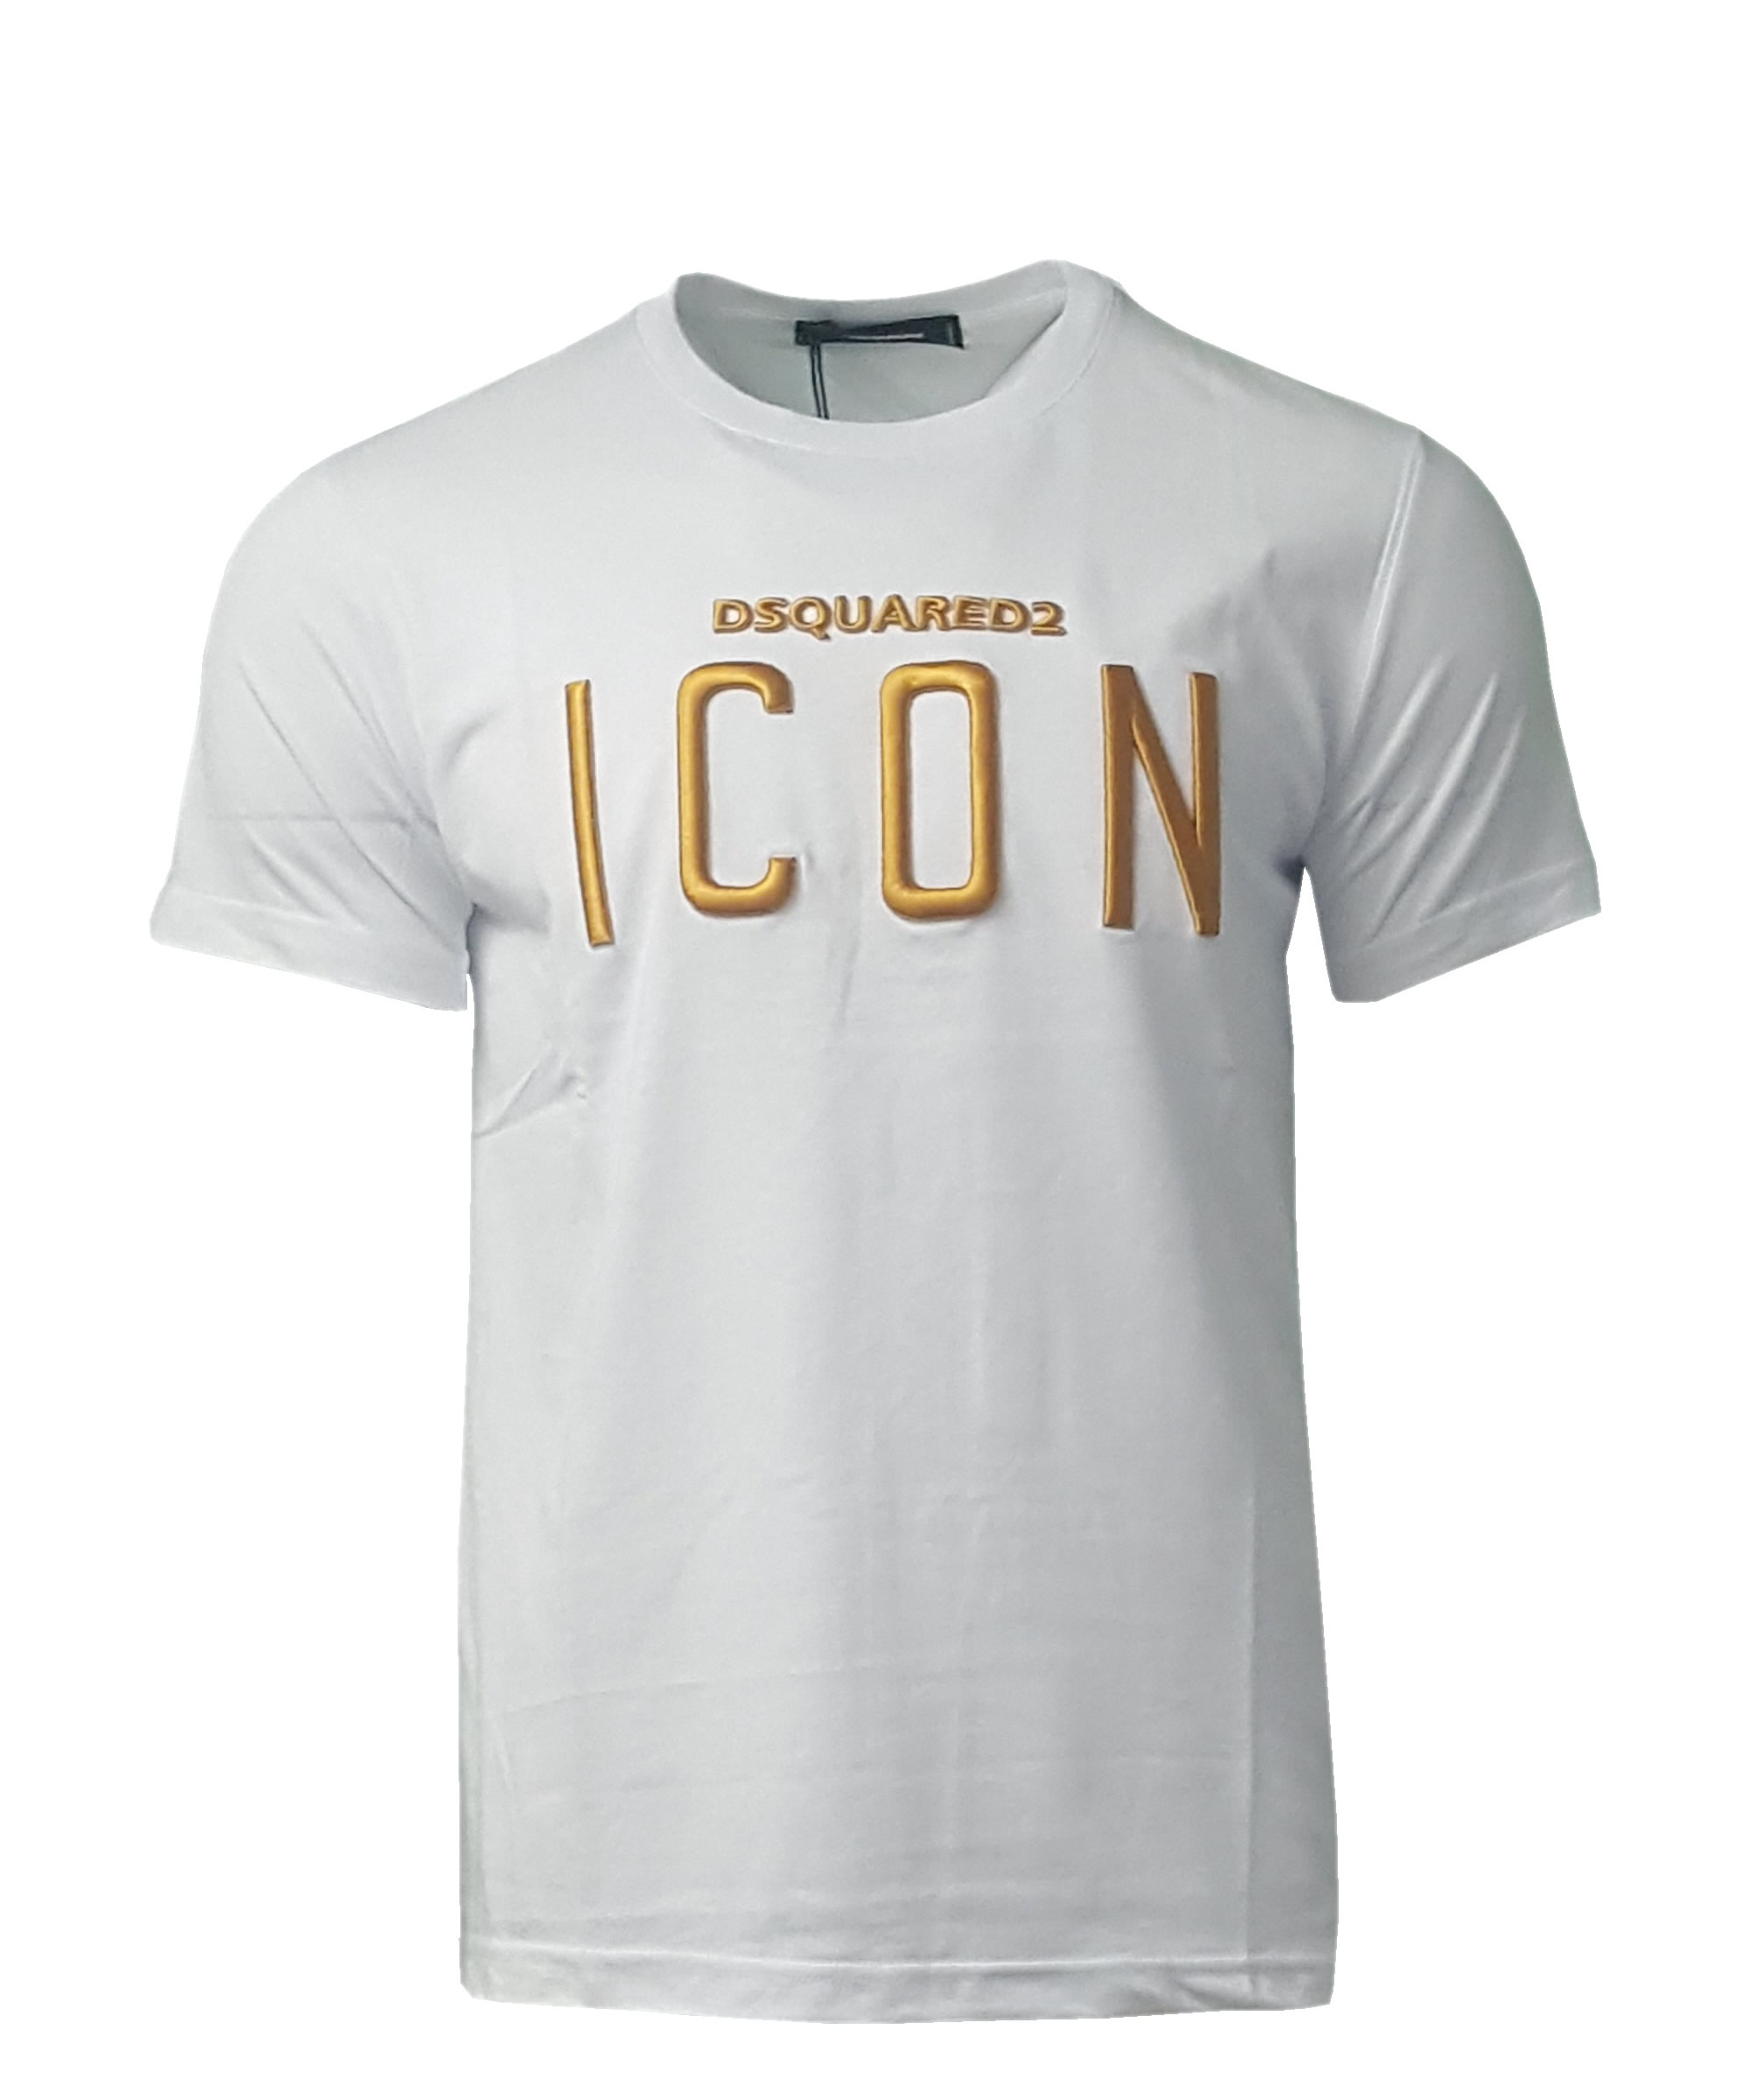 dsquared icon t shirt womens